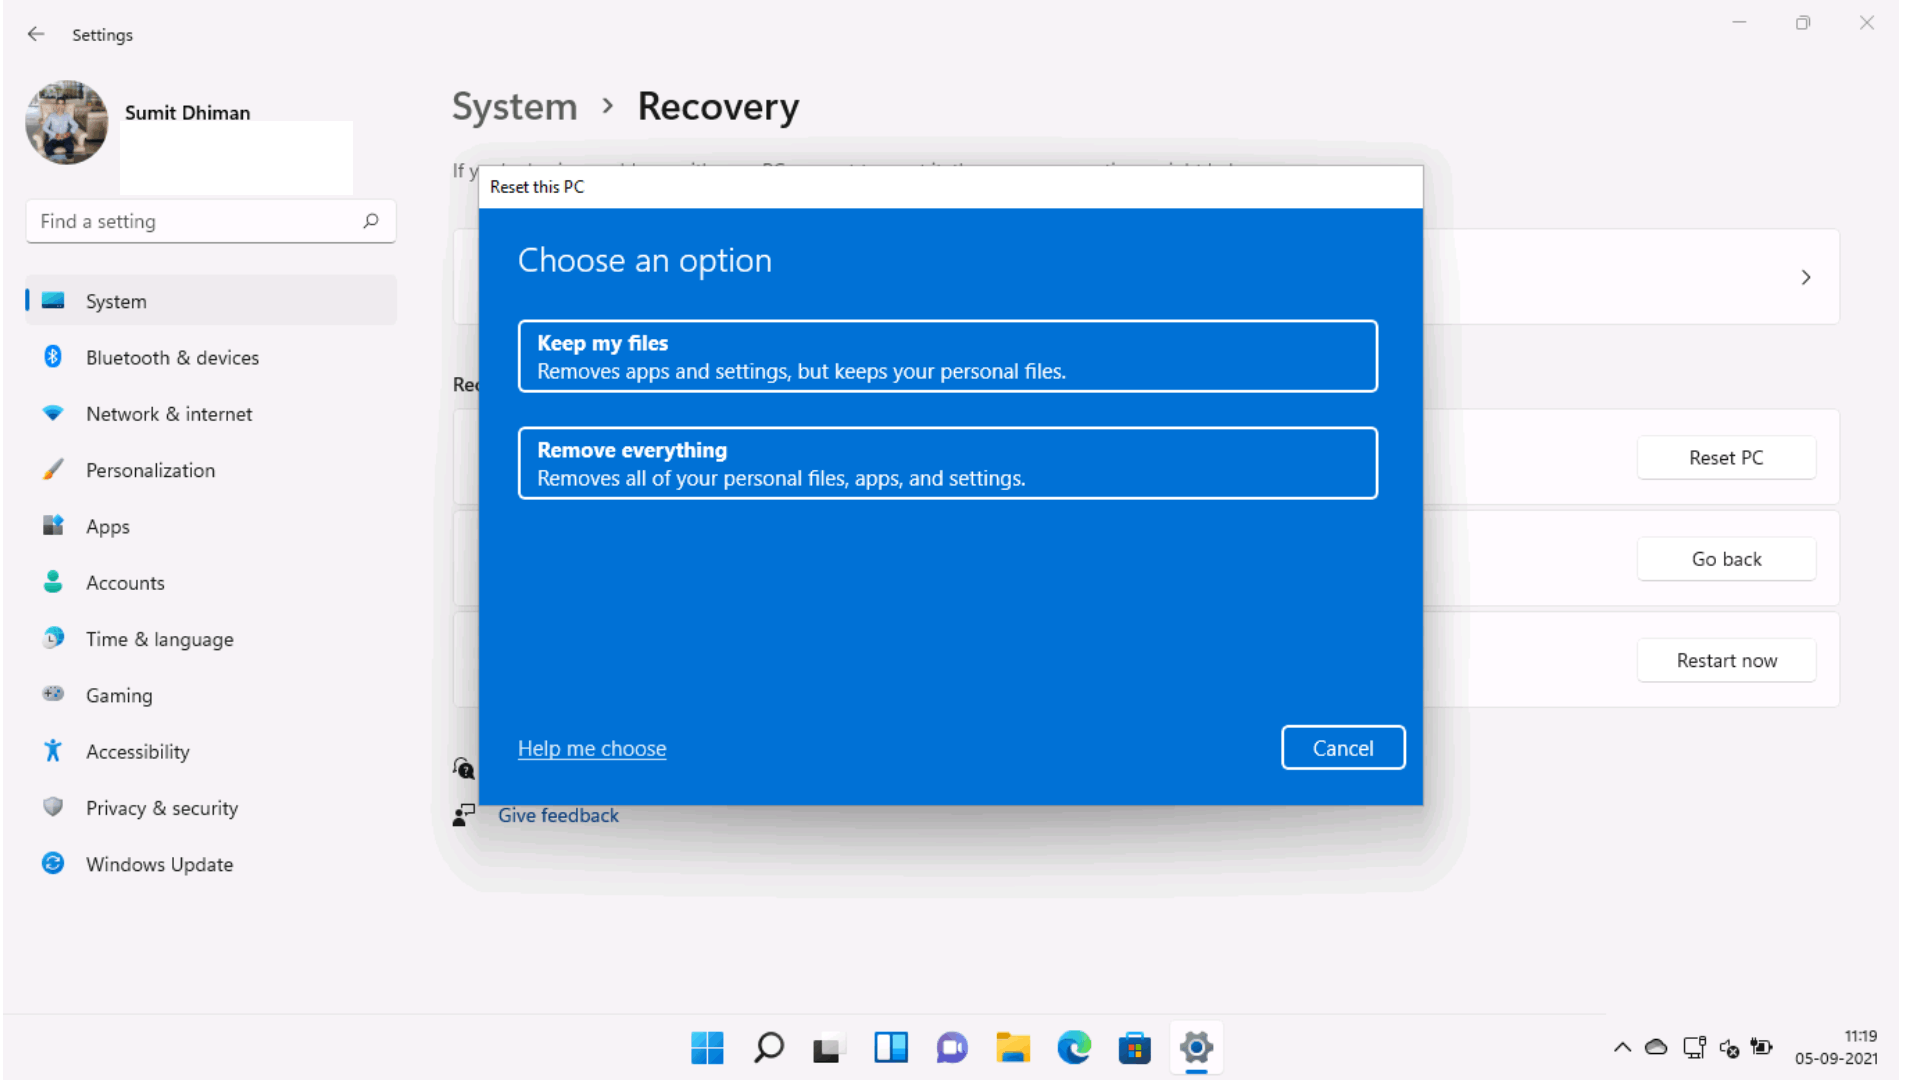 Windows 11 reverted back to s mode after reset 1938b7c8-5eb4-46bd-b227-c3118020e2a3?upload=true.png